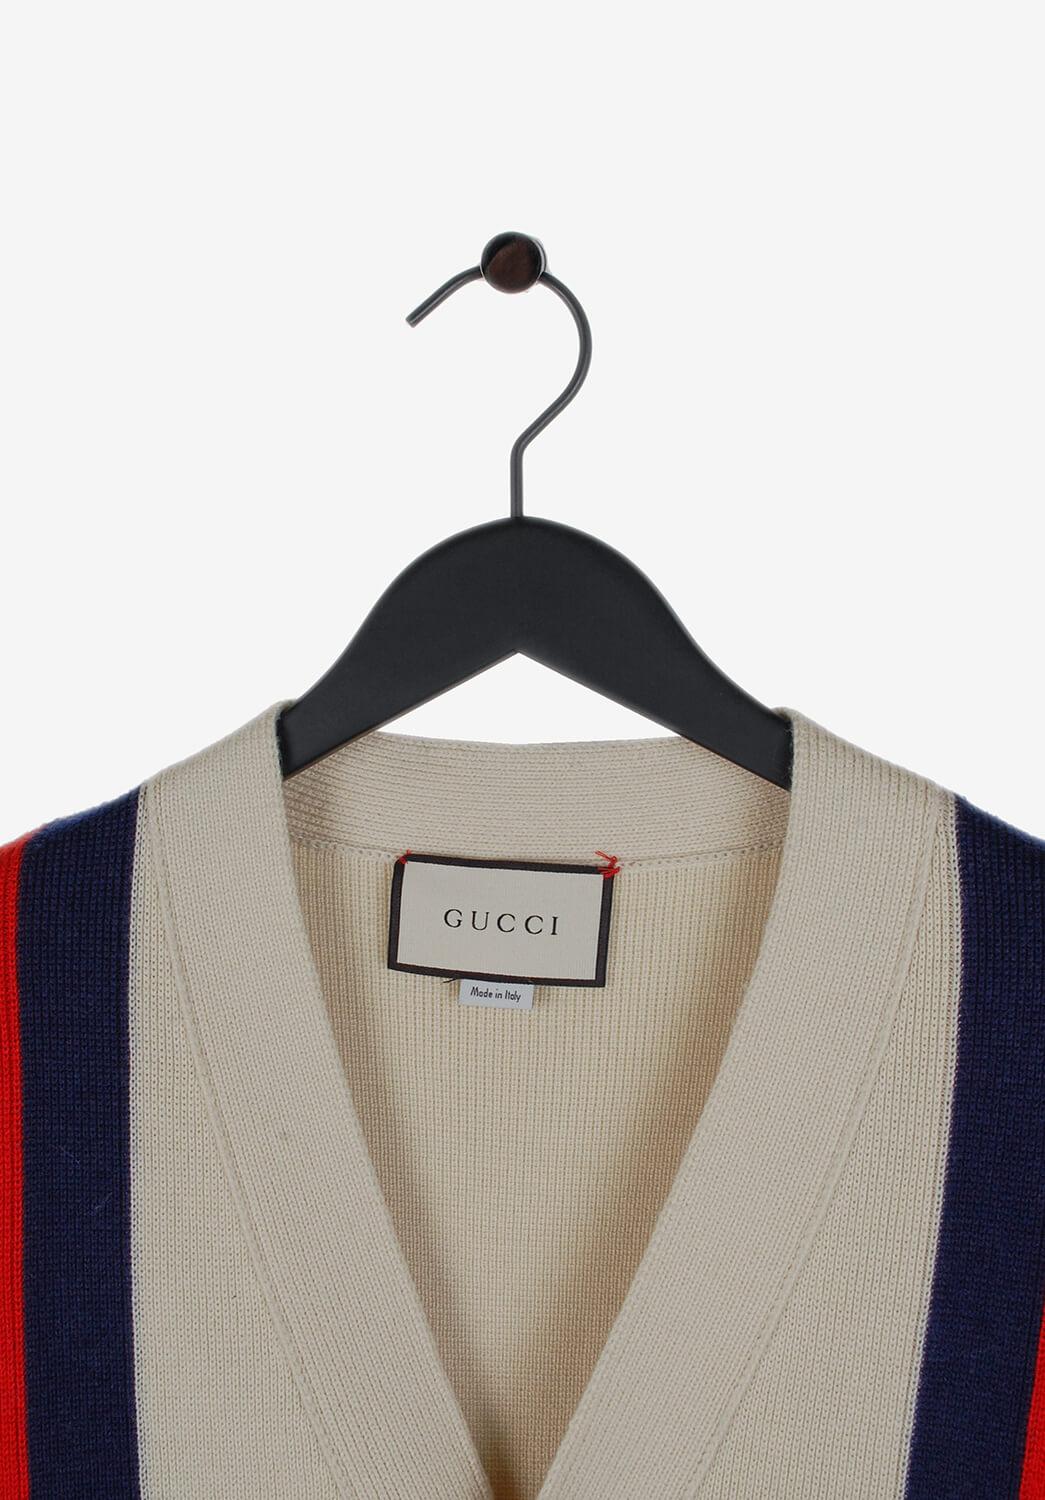 Item for sale is 100% genuine Gucci Cardigan Wool Men Sweater 
Color: Beige
(An actual color may a bit vary due to individual computer screen interpretation)
Material: 100% wool
Tag size: M
This sweater is great quality item. Rate 9 of 10, excellent